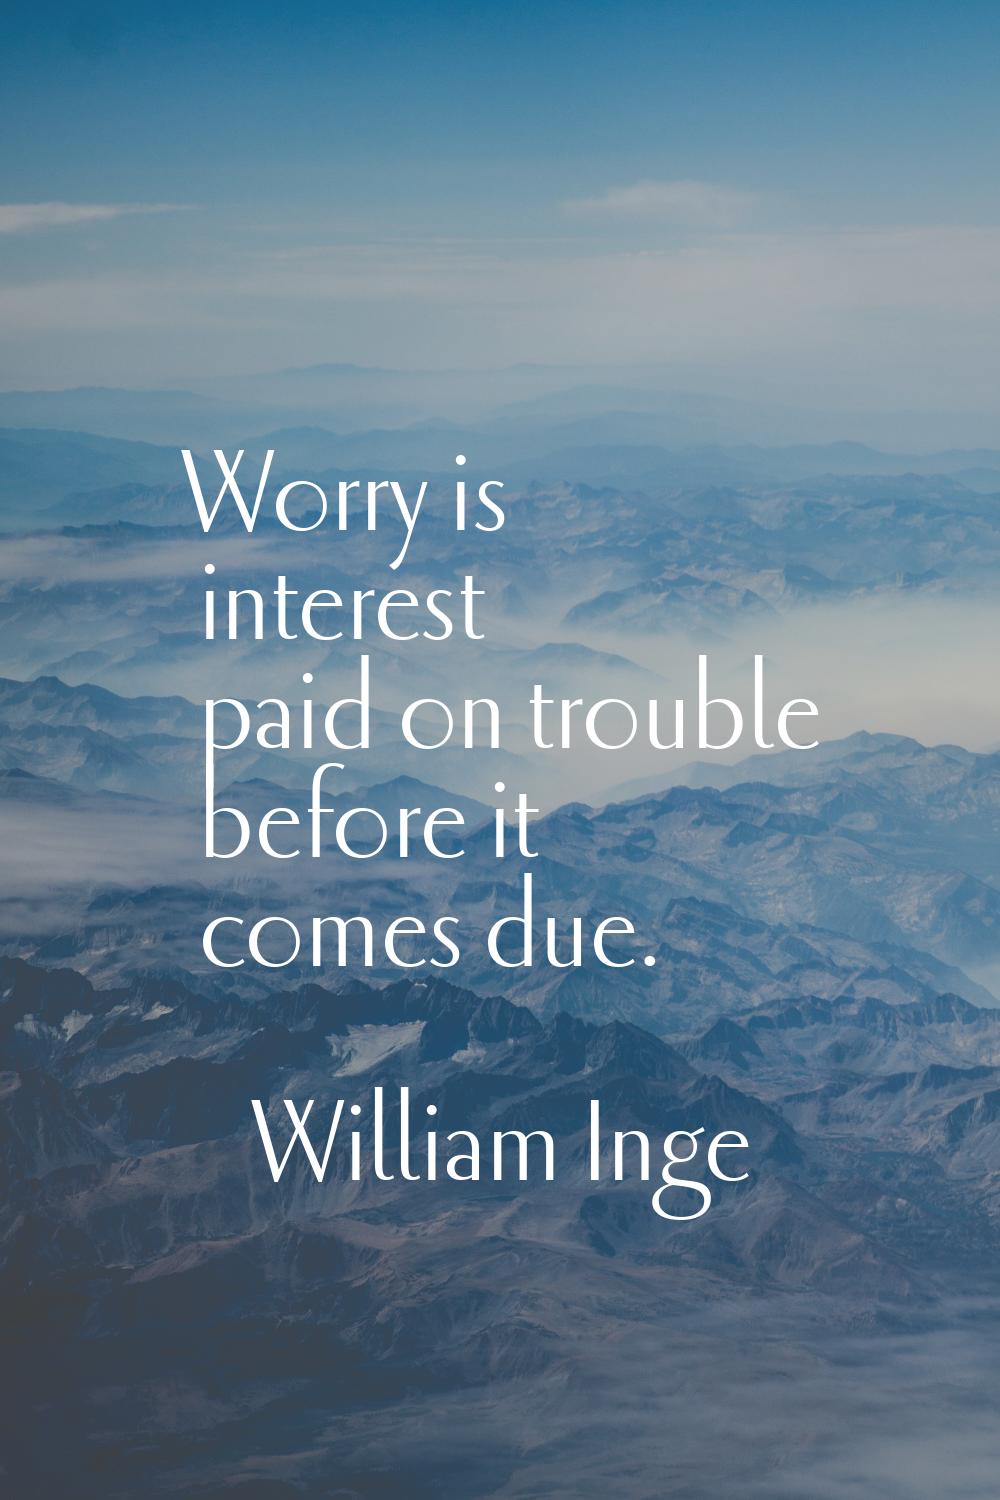 Worry is interest paid on trouble before it comes due.